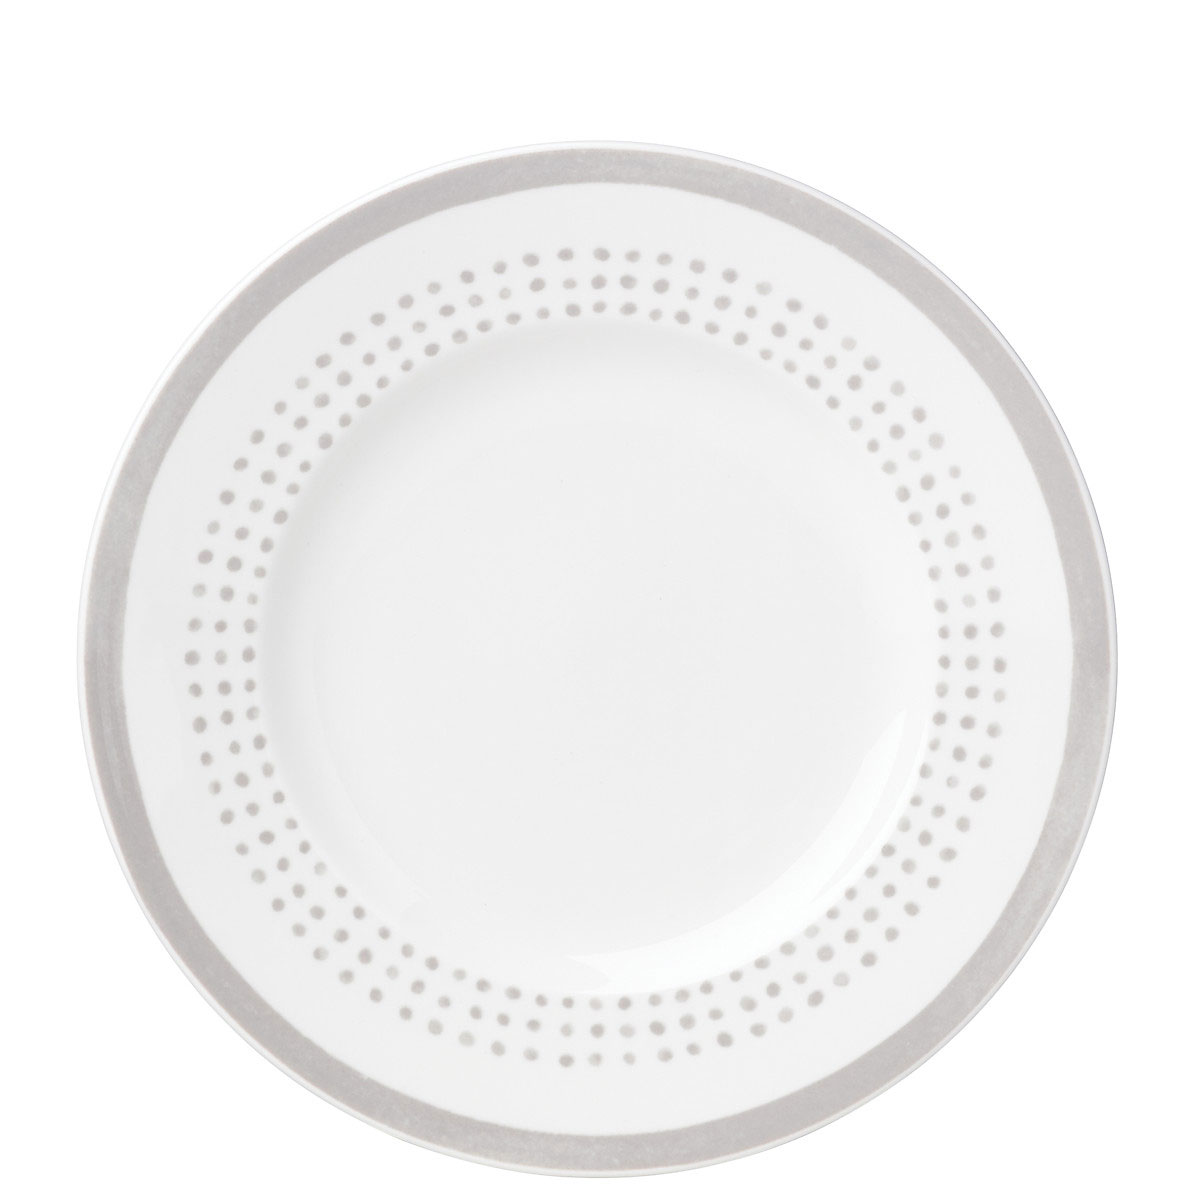 Kate Spade China by Lenox, Charlotte Street East Grey Accent Plate, Single